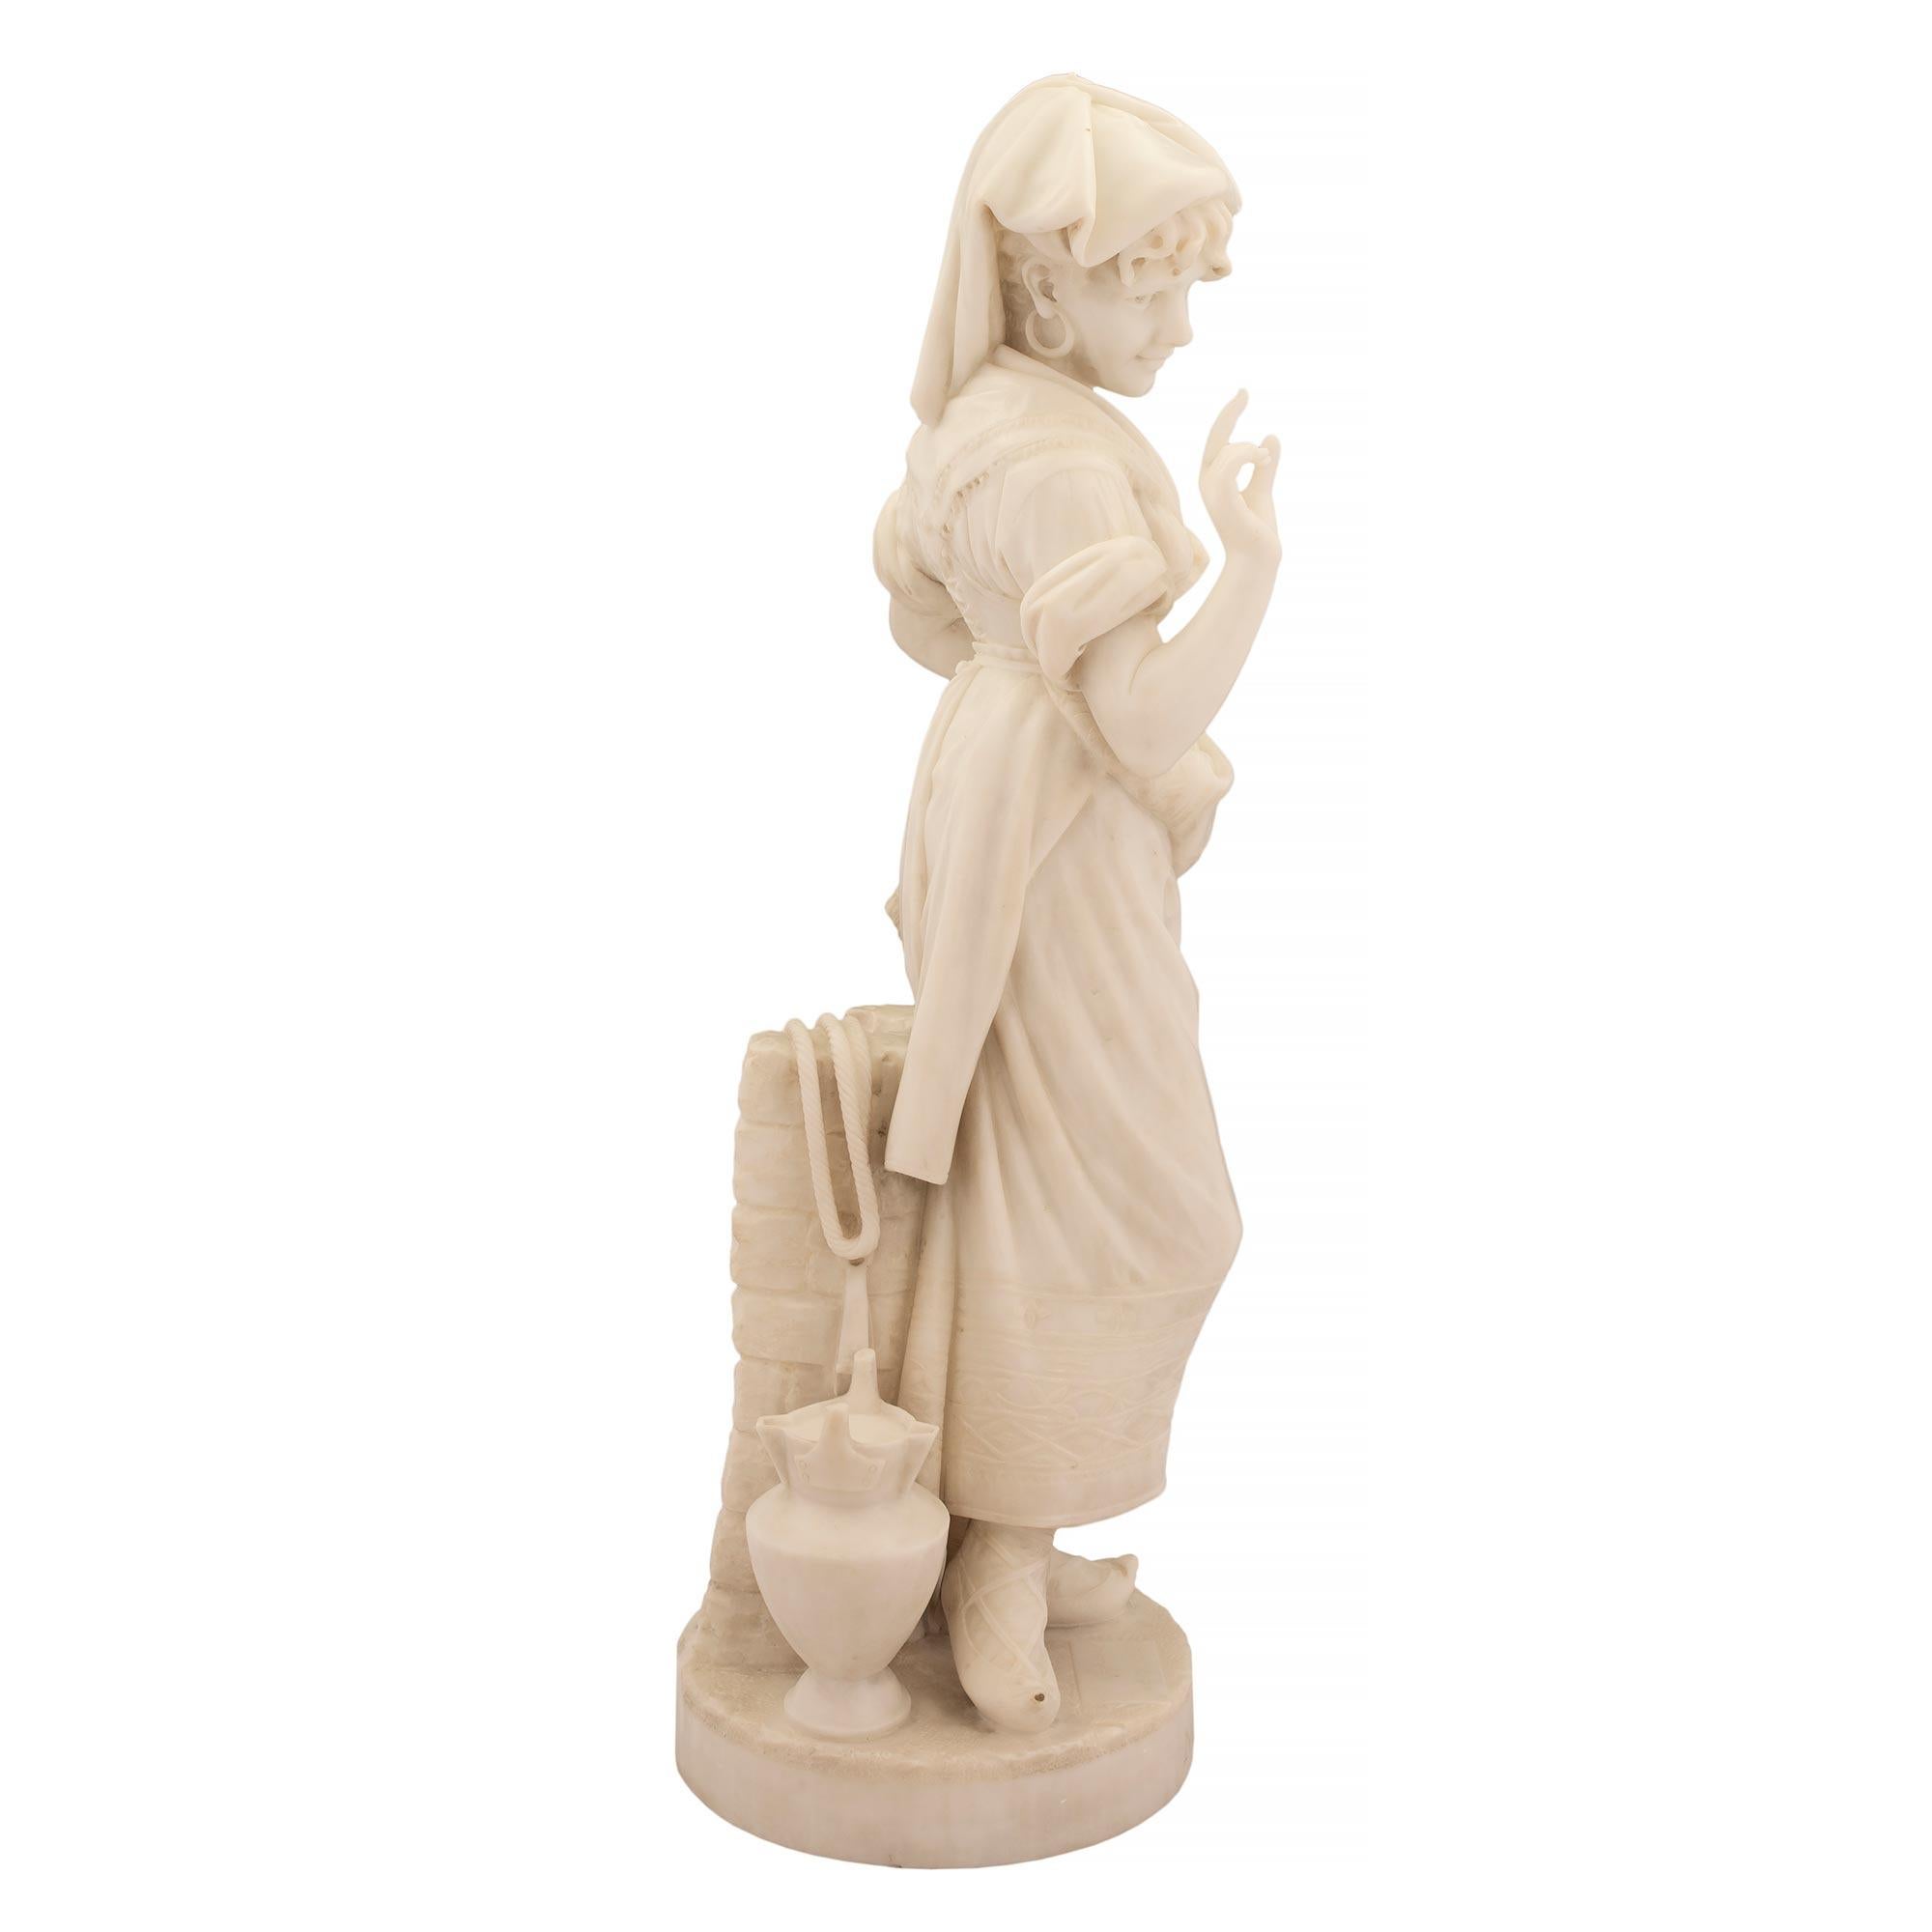 Italian 19th Century Carrara Marble Statue of a Young Girl In Good Condition For Sale In West Palm Beach, FL